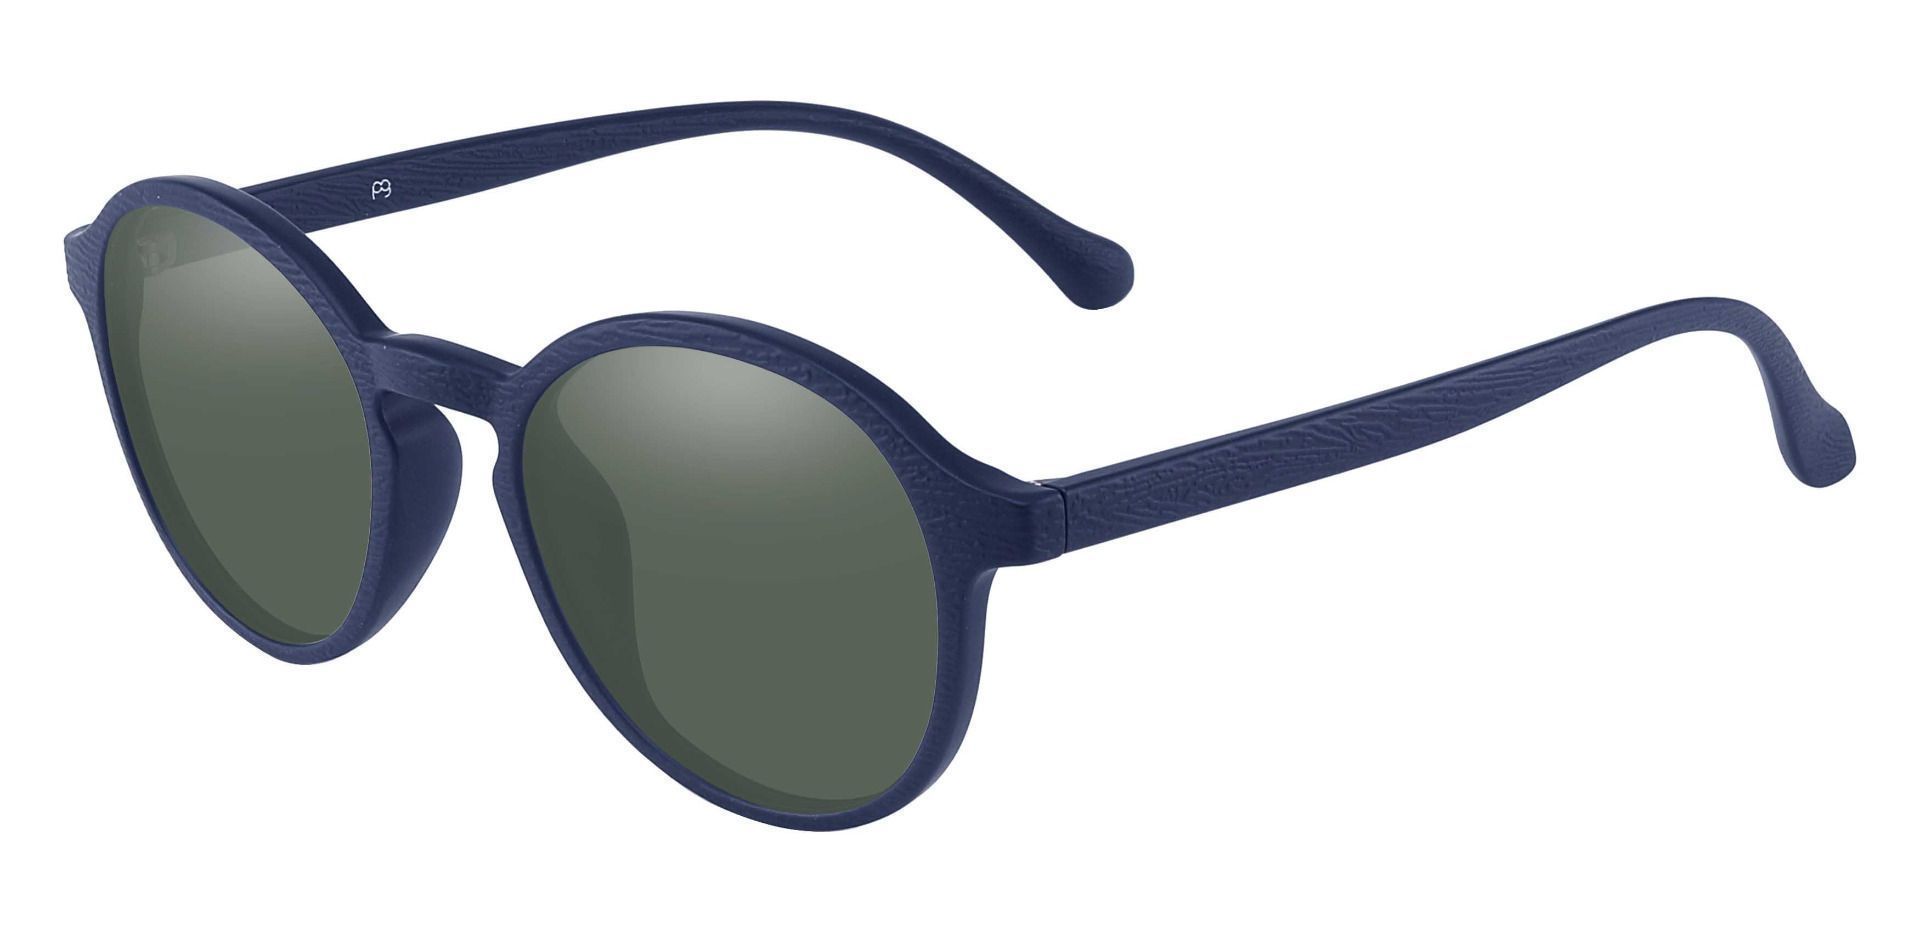 Whitney Round Non-Rx Sunglasses - Blue Frame With Green Lenses